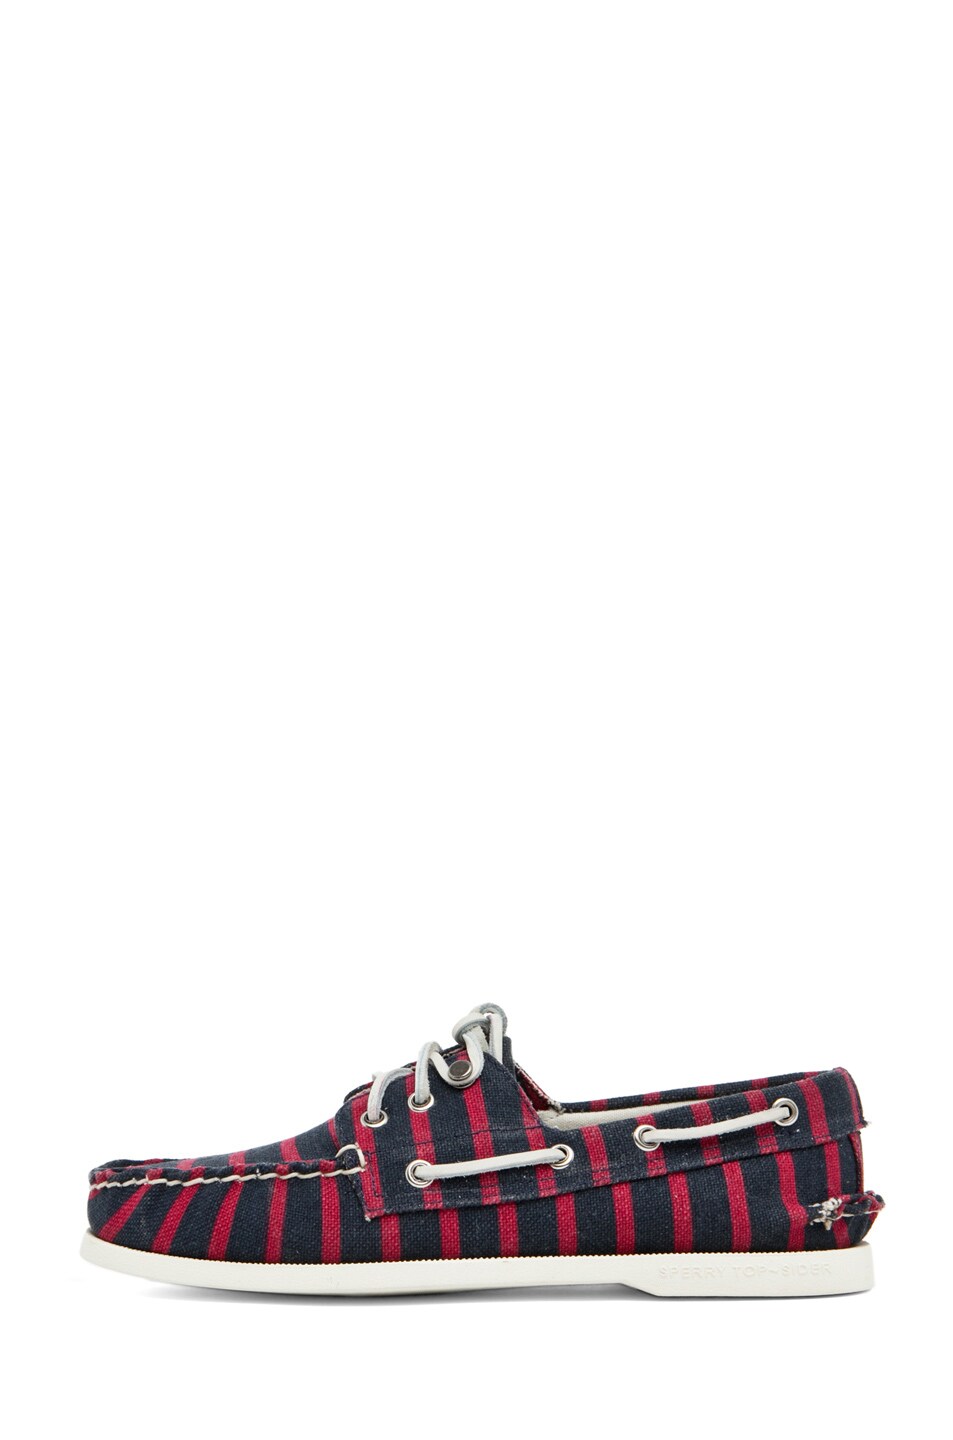 Image 1 of Band of Outsiders x Sperry Top-Sider 3 Eye Boat Shoe in Navy & Red Printed Canvas Stripe